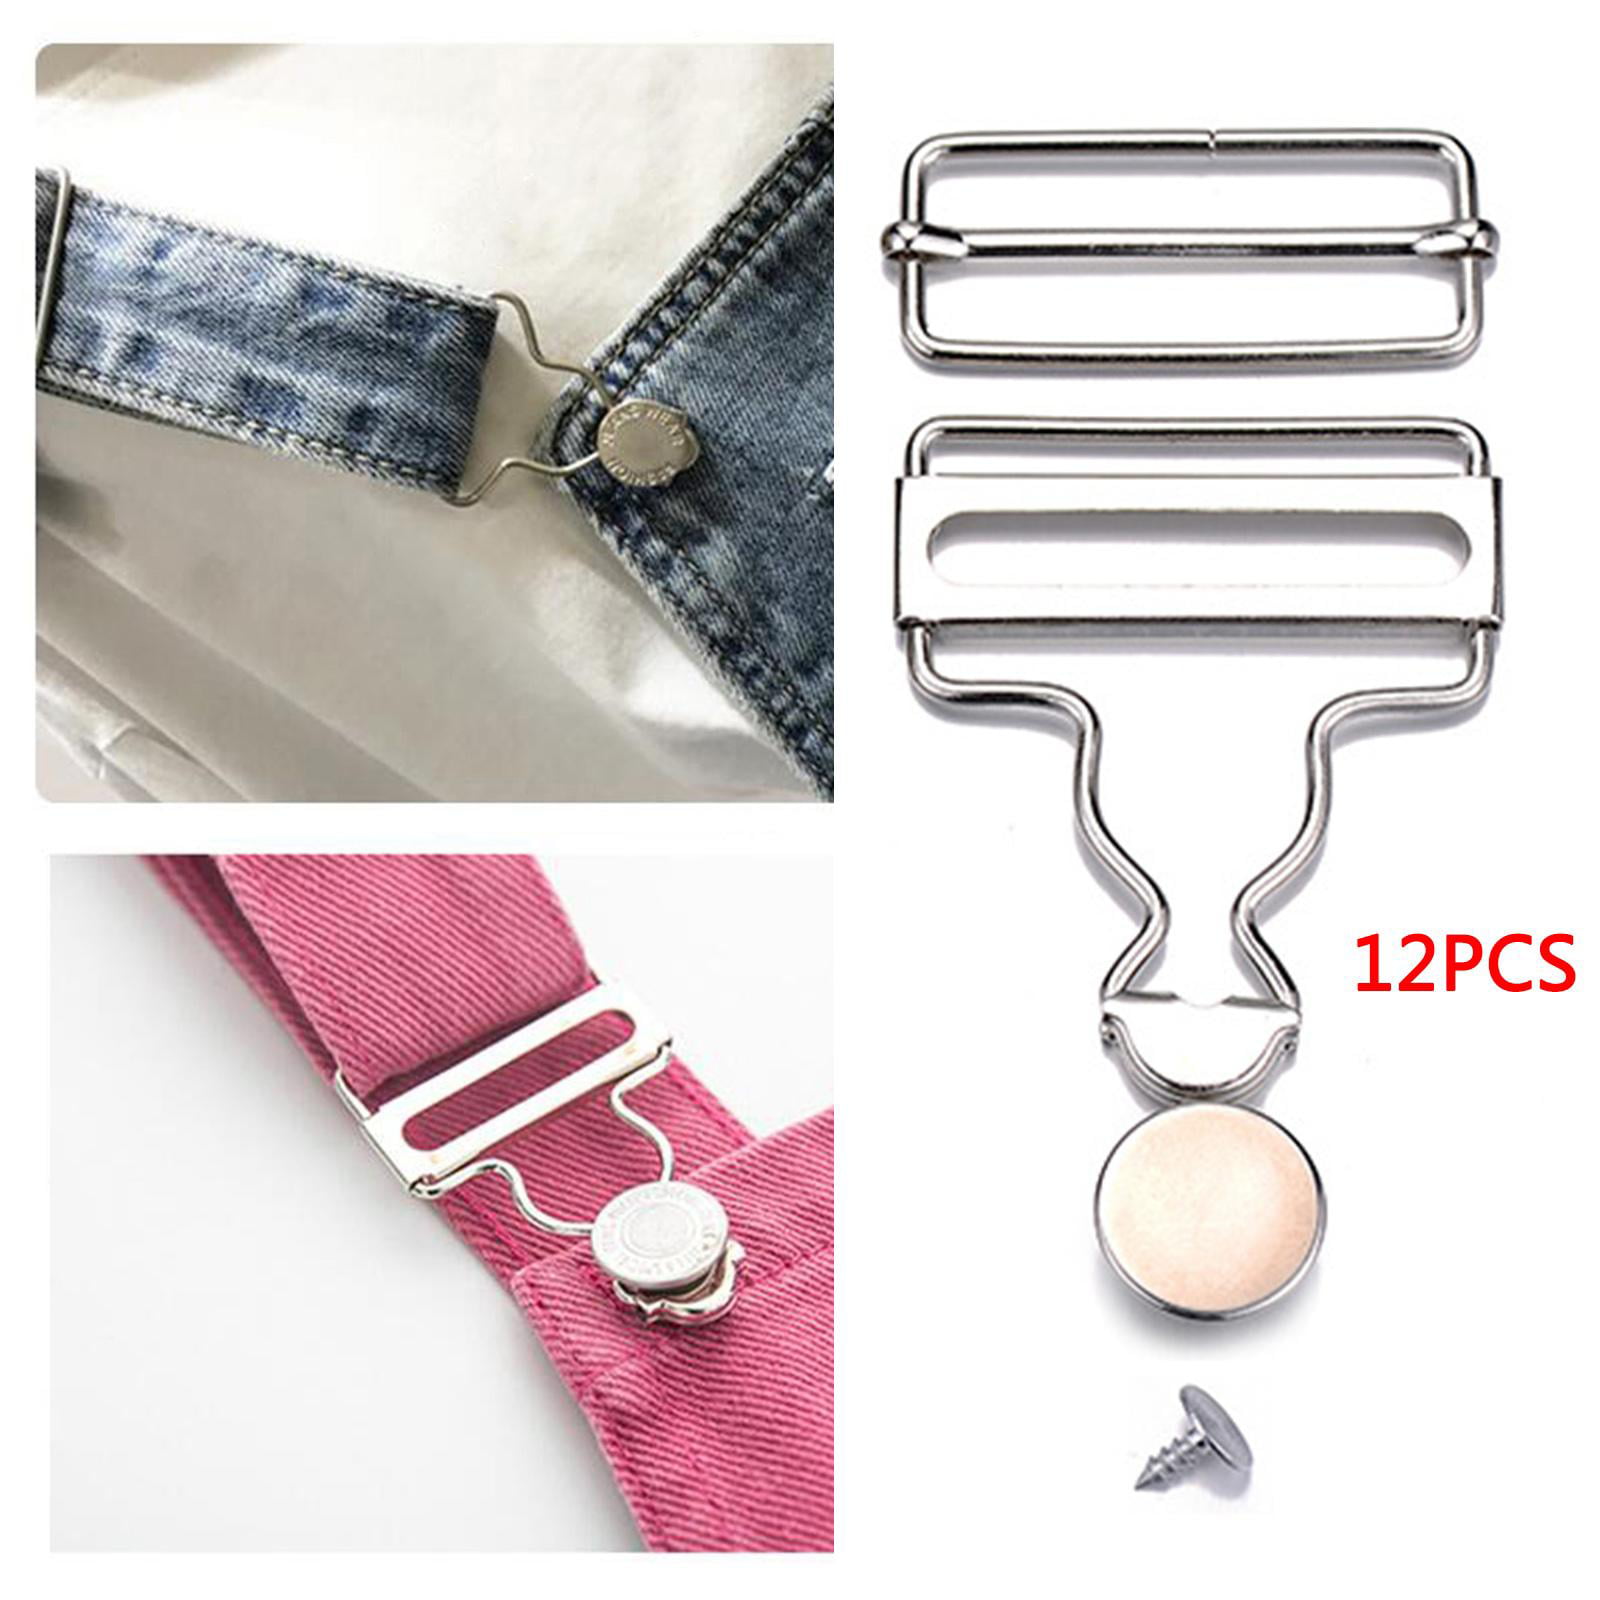 Buckle Overall Buckles Replacement Gourd Hooks Fastener Suspender Strap Clip Metal Braces Buttoned Buttons Hooking Bib, Size: 4pcs